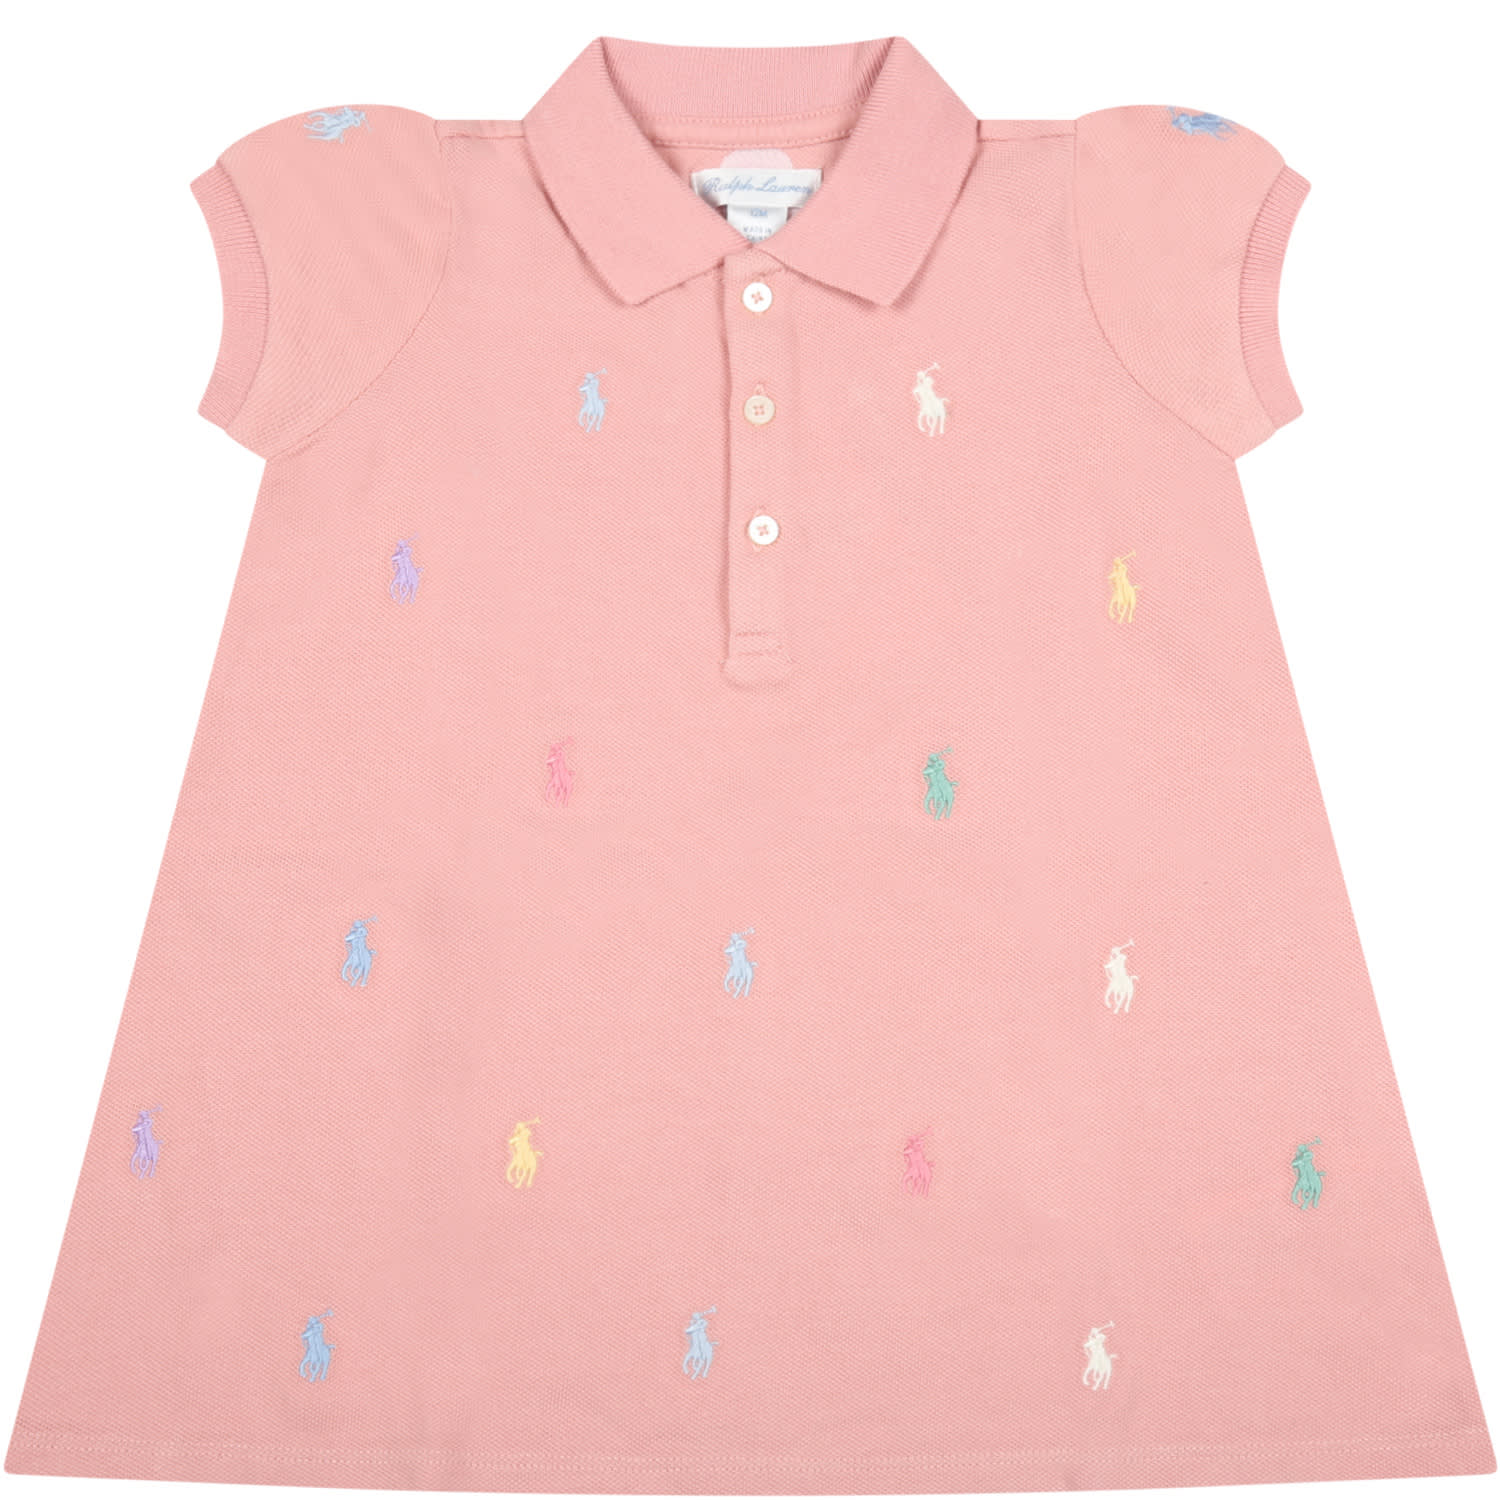 Ralph Lauren Pink Dress For Baby Girl With Pony Logo